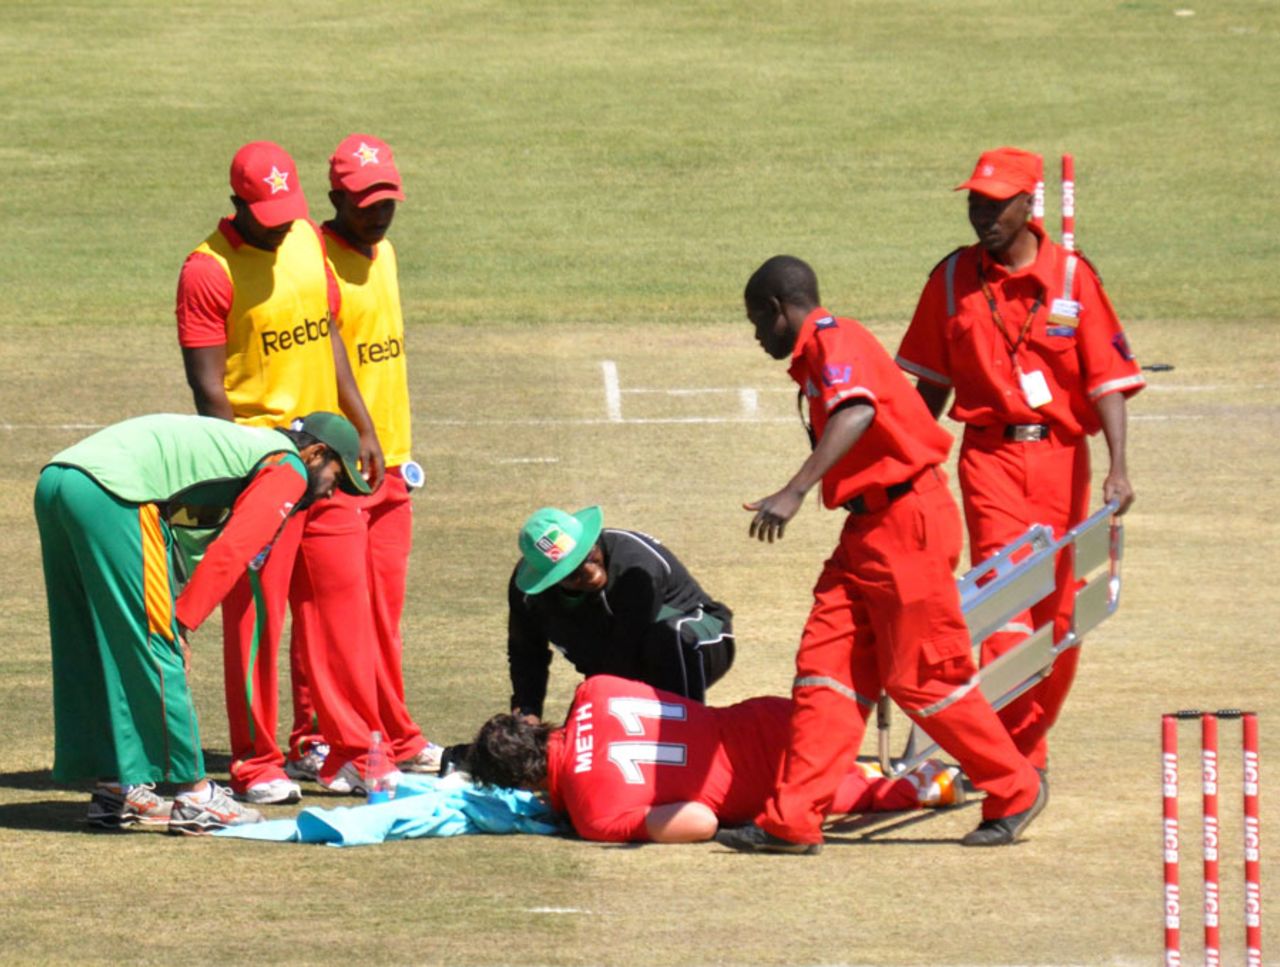 Keegan Meth is attended to after being hit on the face while following through, Zimbabwe v Bangladesh, 5th ODI, Bulawayo, August 21, 2011